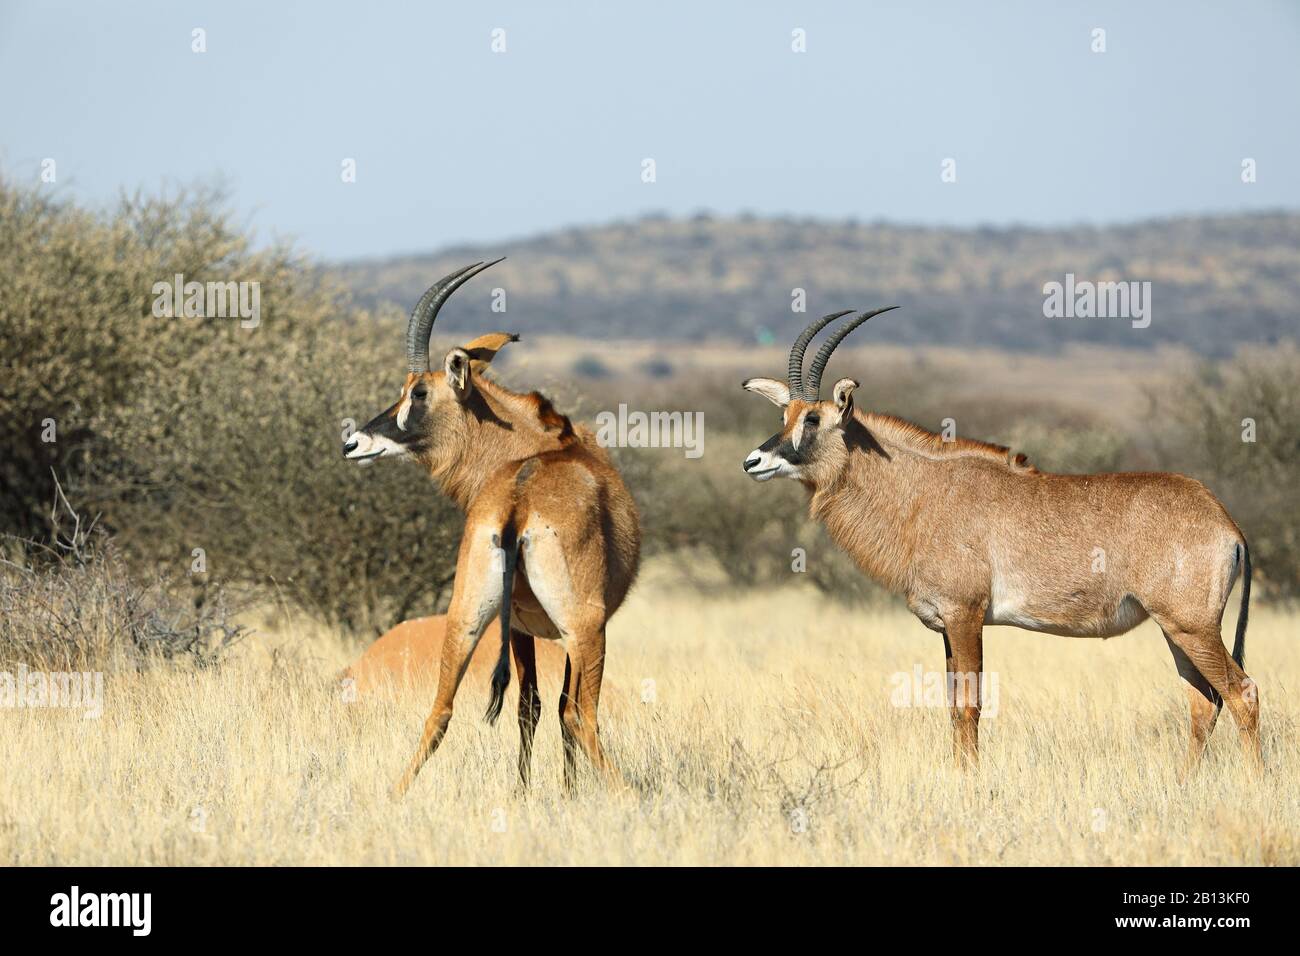 roan antelope (Hippotragus equinus), two roans stand in savanna, South Africa, Kimberley Stock Photo